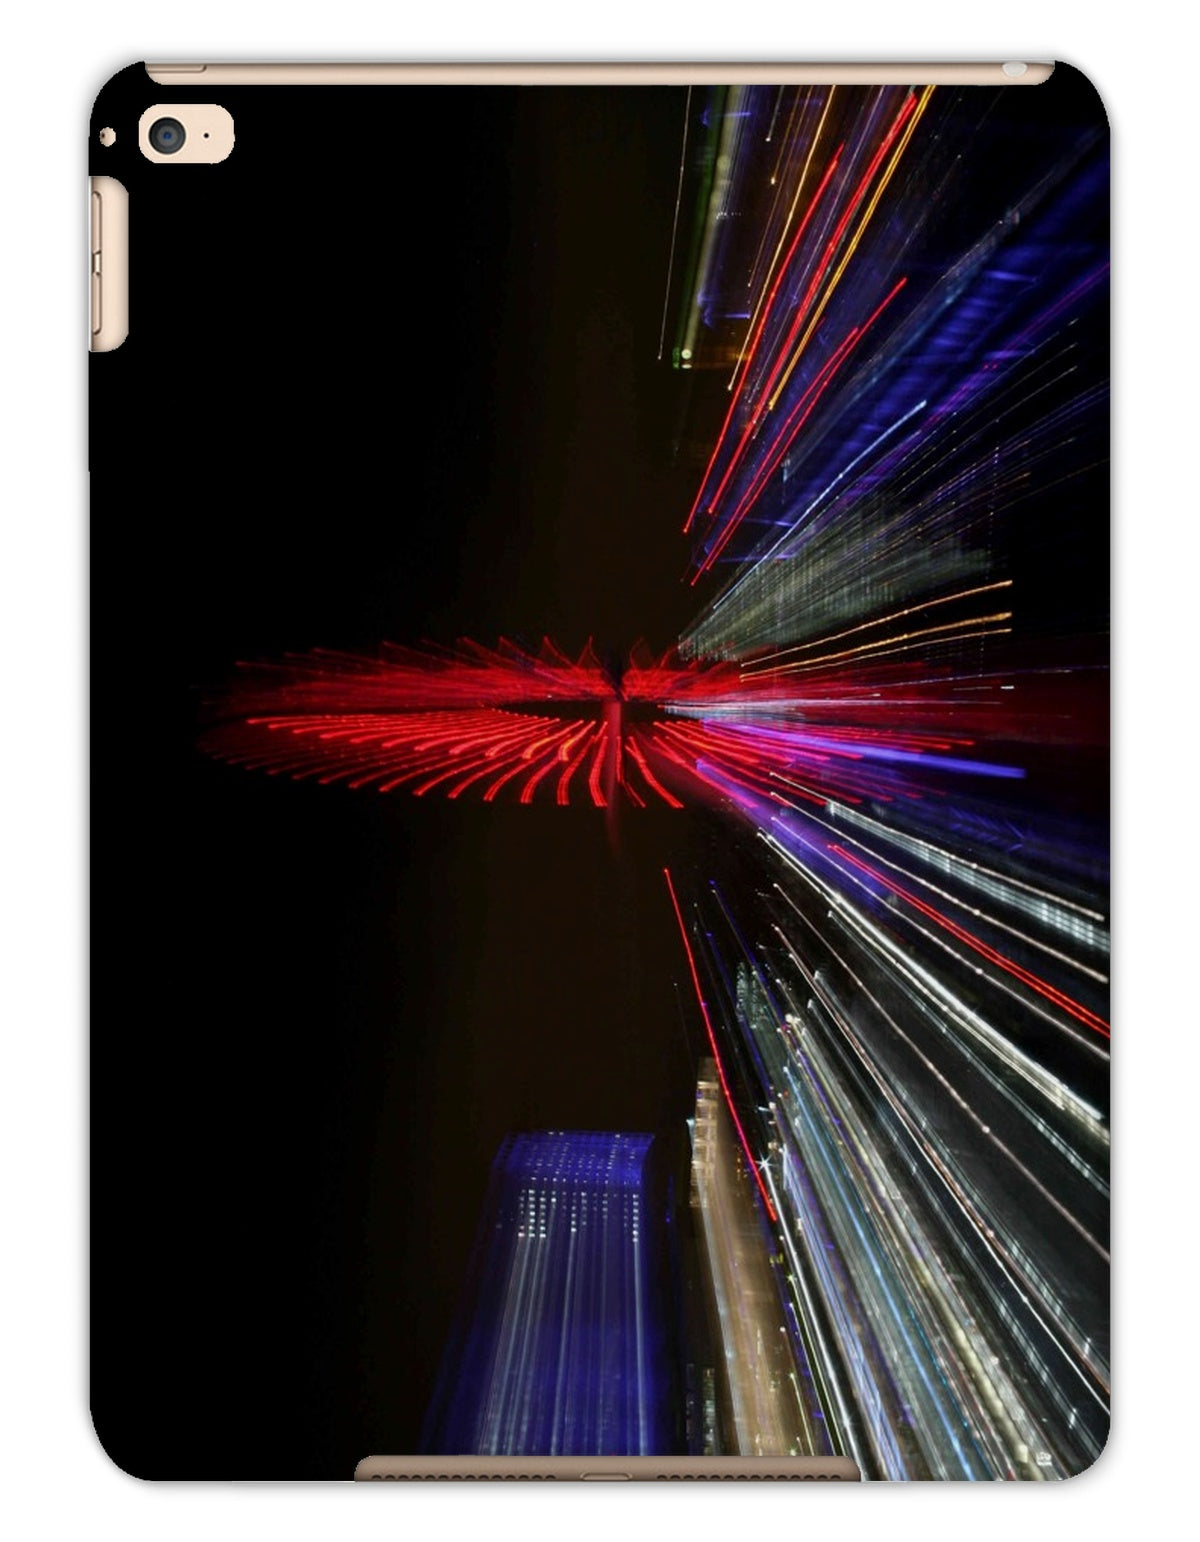 LONDON NIGHTS: THE LONDON EYE Tablet Cases - Amy Adams Photography